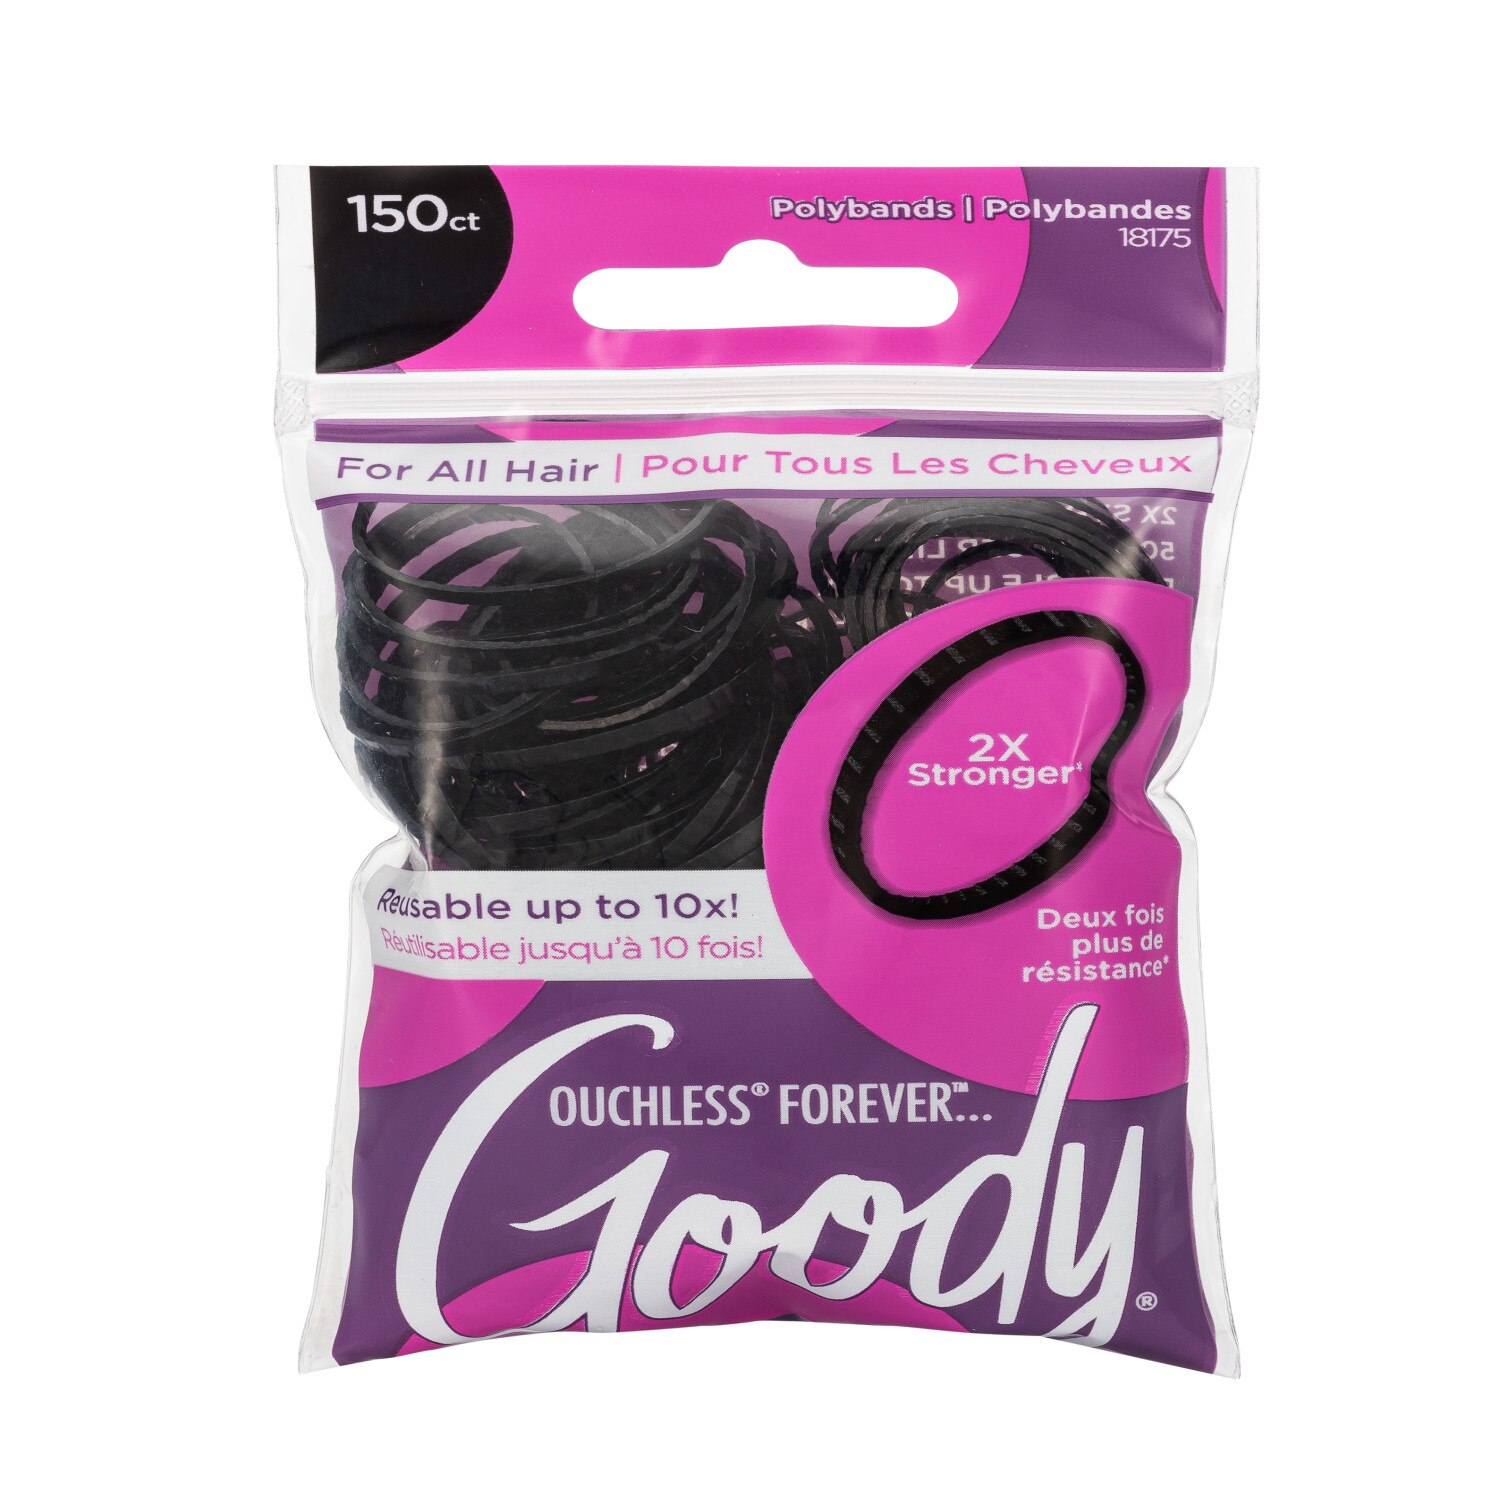 GOODY FOREVER POLYBAND BLACK, 150CT